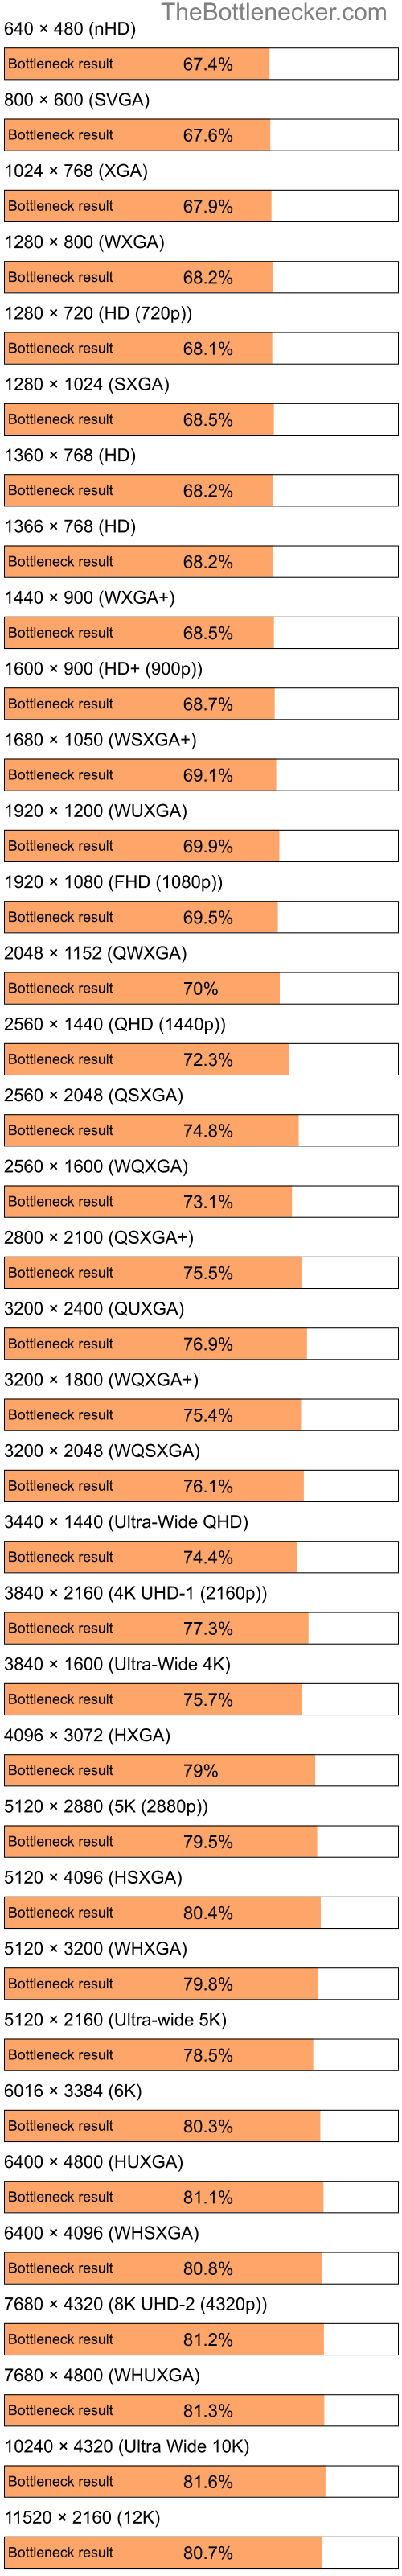 Bottleneck results by resolution for Intel Atom Z520 and AMD Mobility Radeon HD 4225 in General Tasks